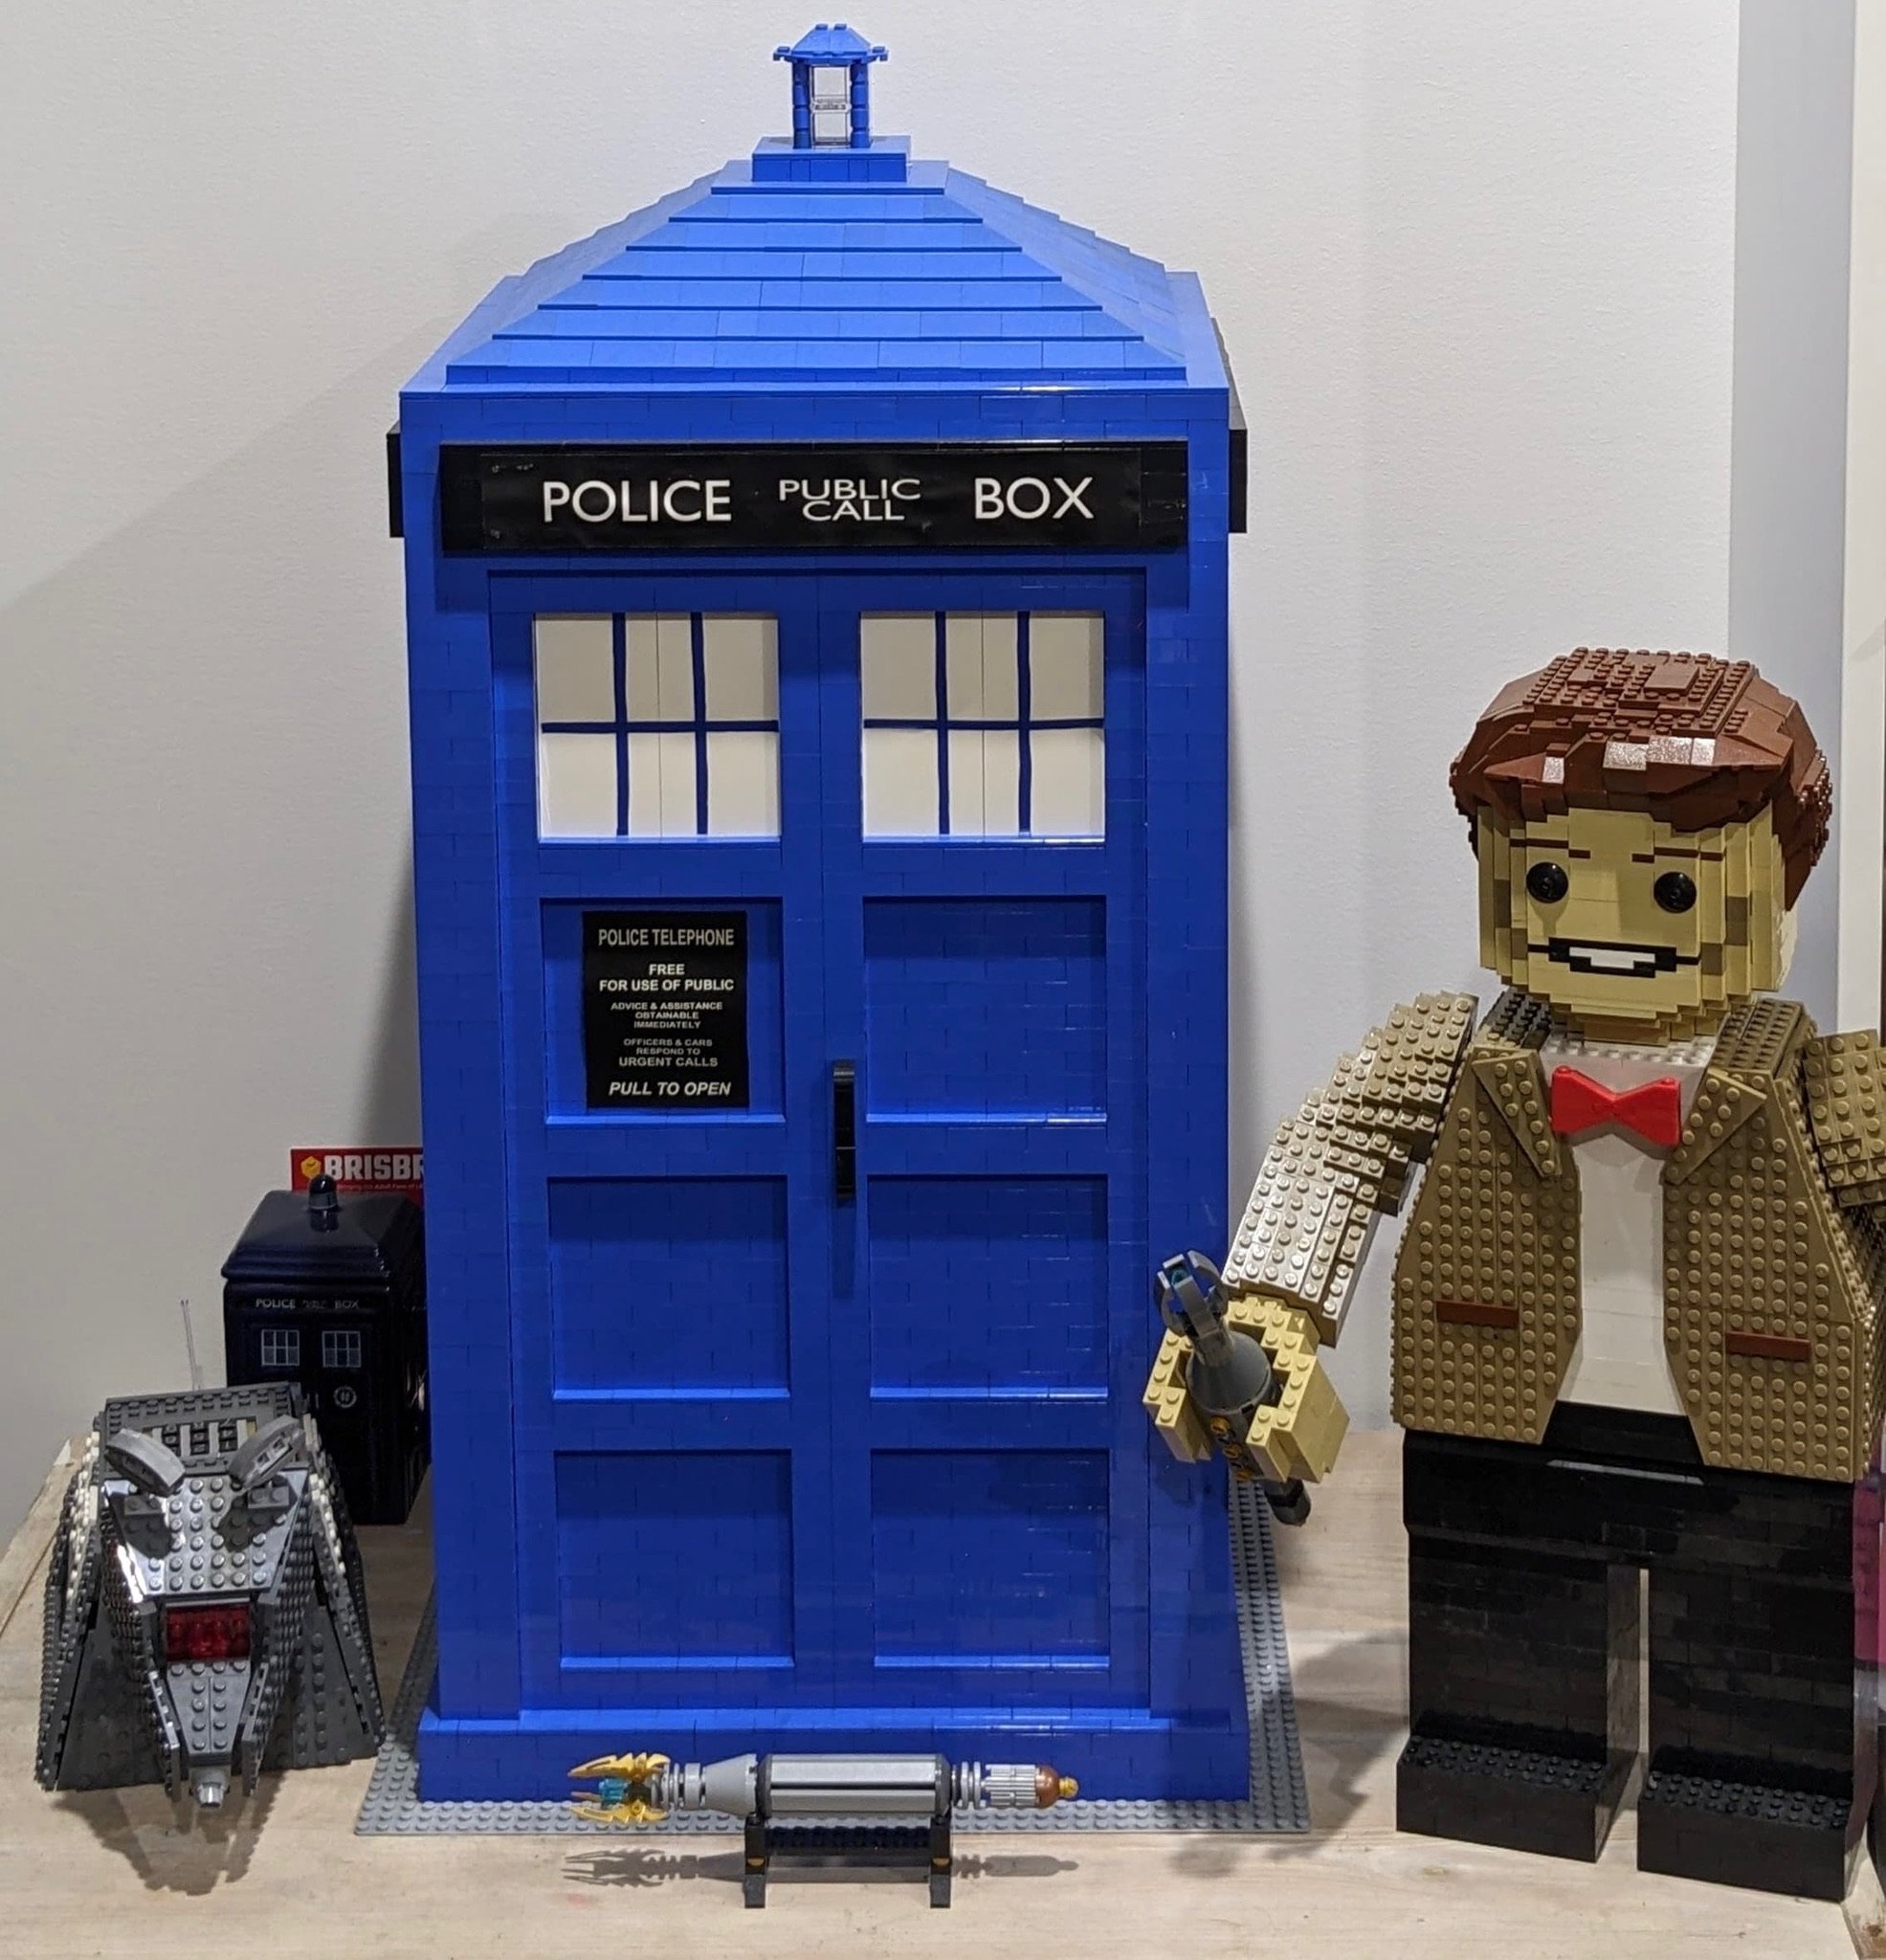 LEGO Doctor Who in the Land of Oz - BrickNerd - All things LEGO and the LEGO  fan community